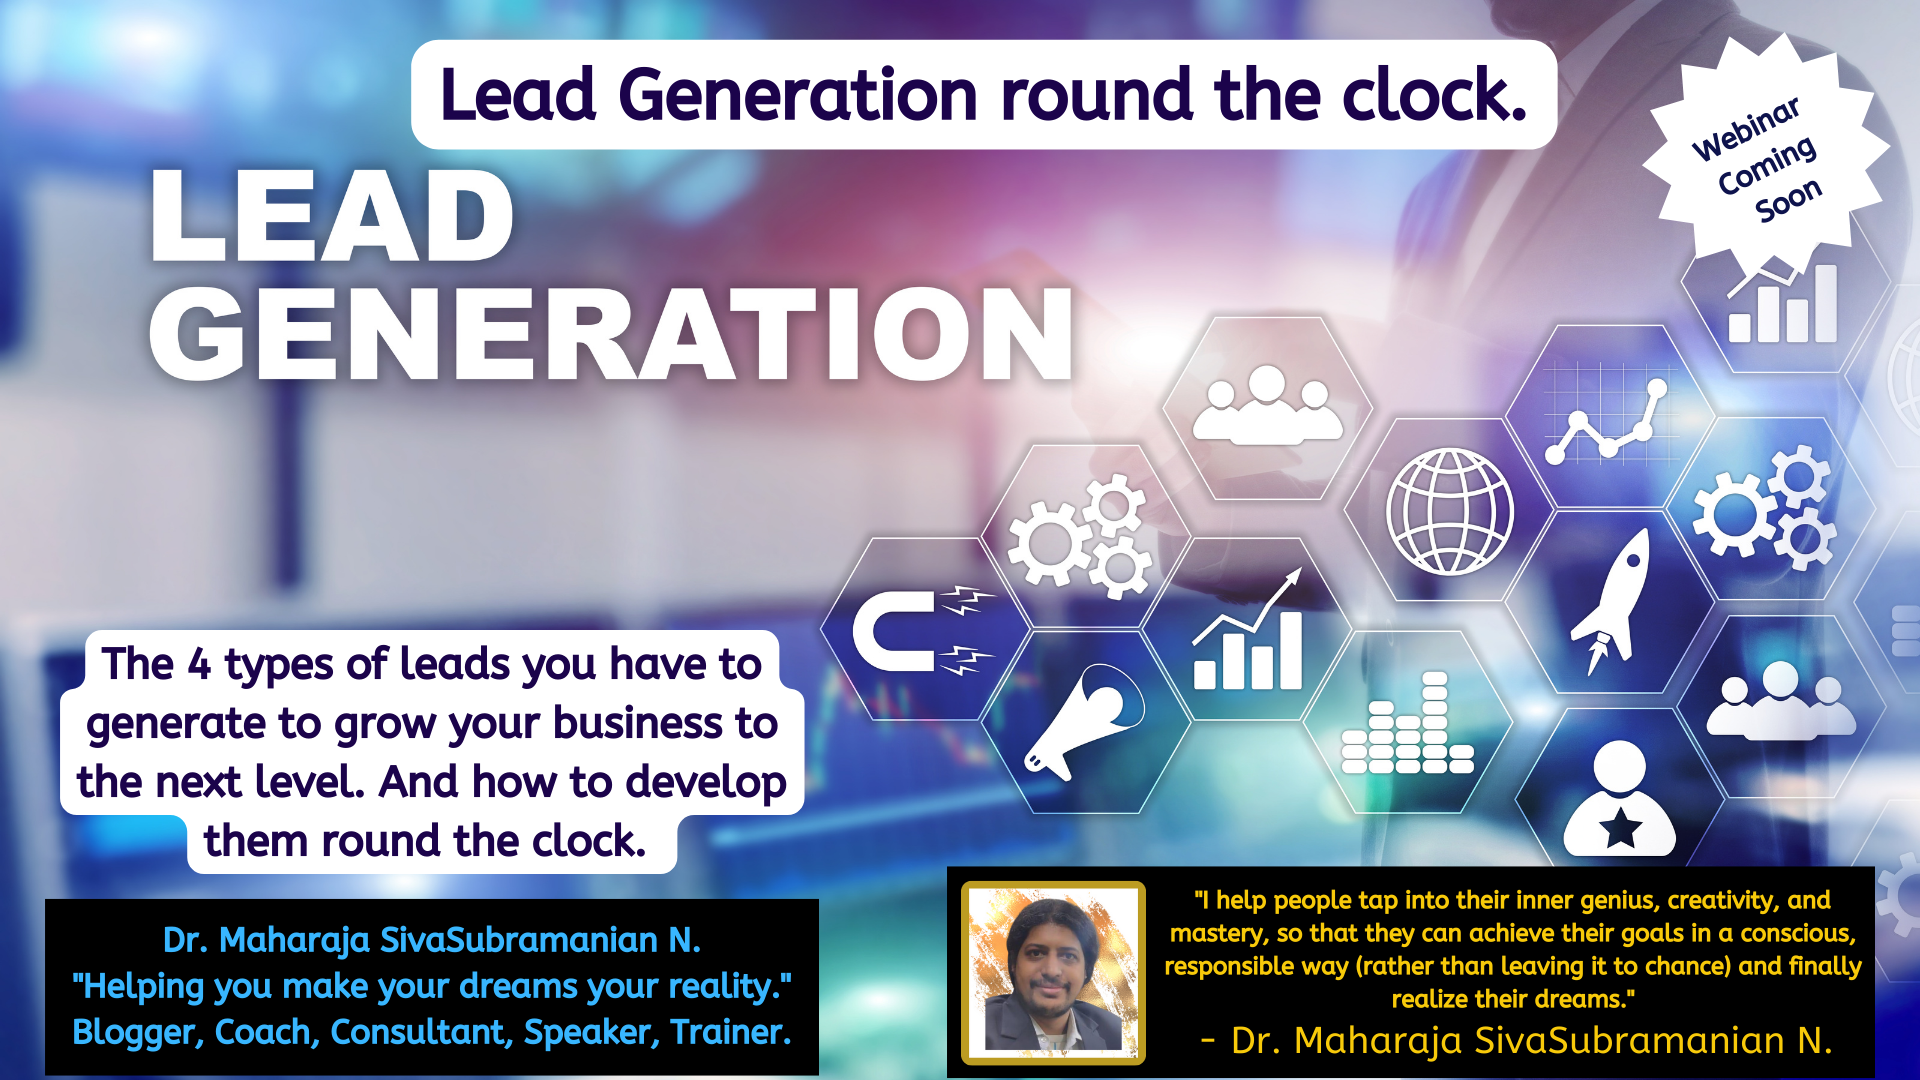 Lead Generation round the clock for Freelancers. – Upcoming free webinar.